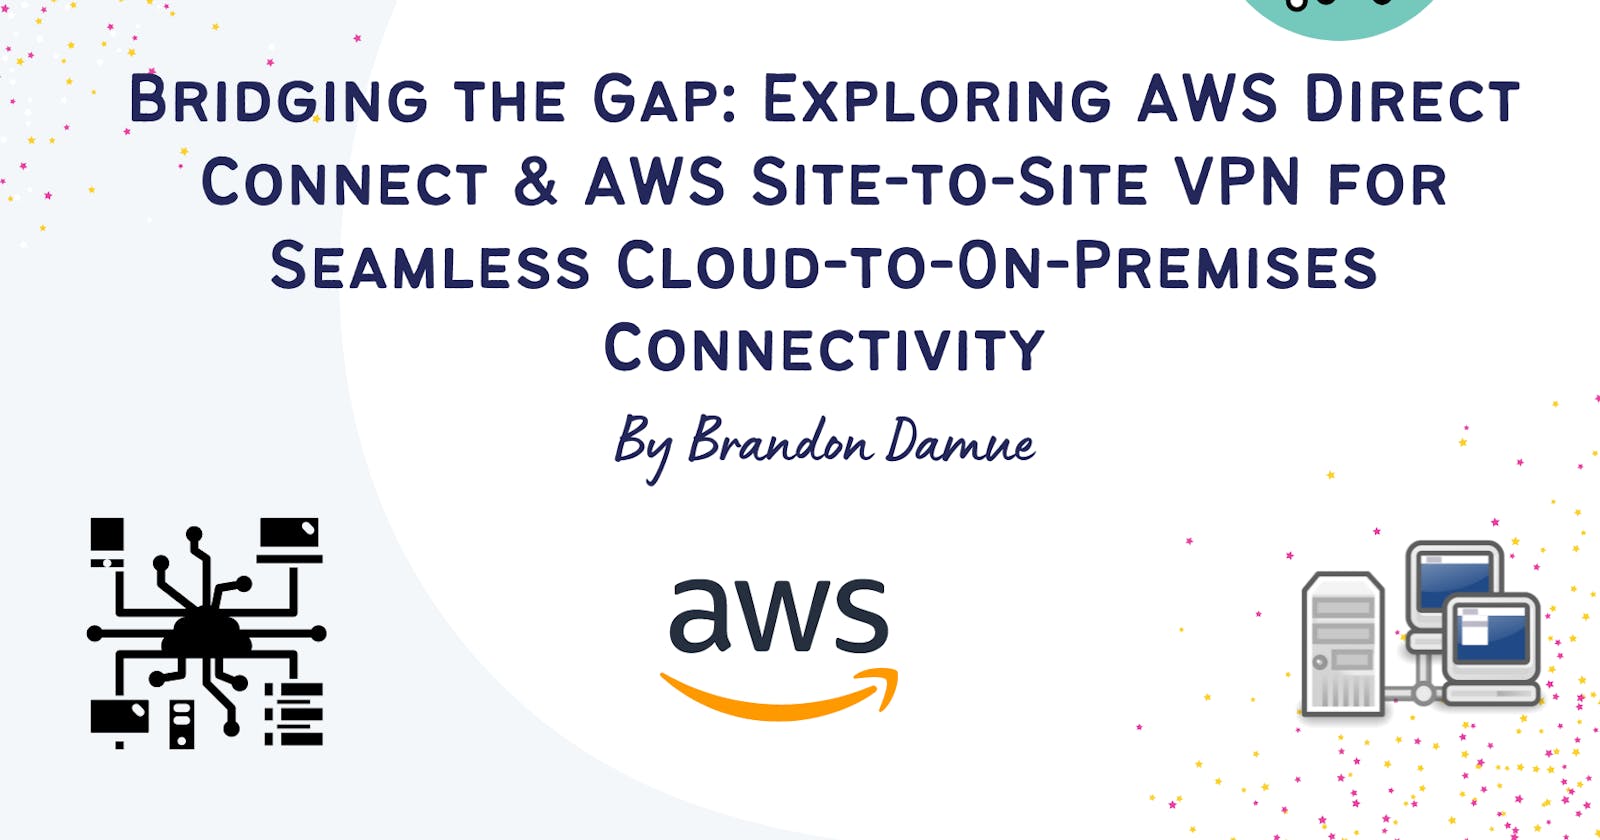 Bridging the Gap: Exploring  AWS Direct Connect & AWS Site-to-Site VPN for Seamless Cloud-to-On-Premises Connectivity